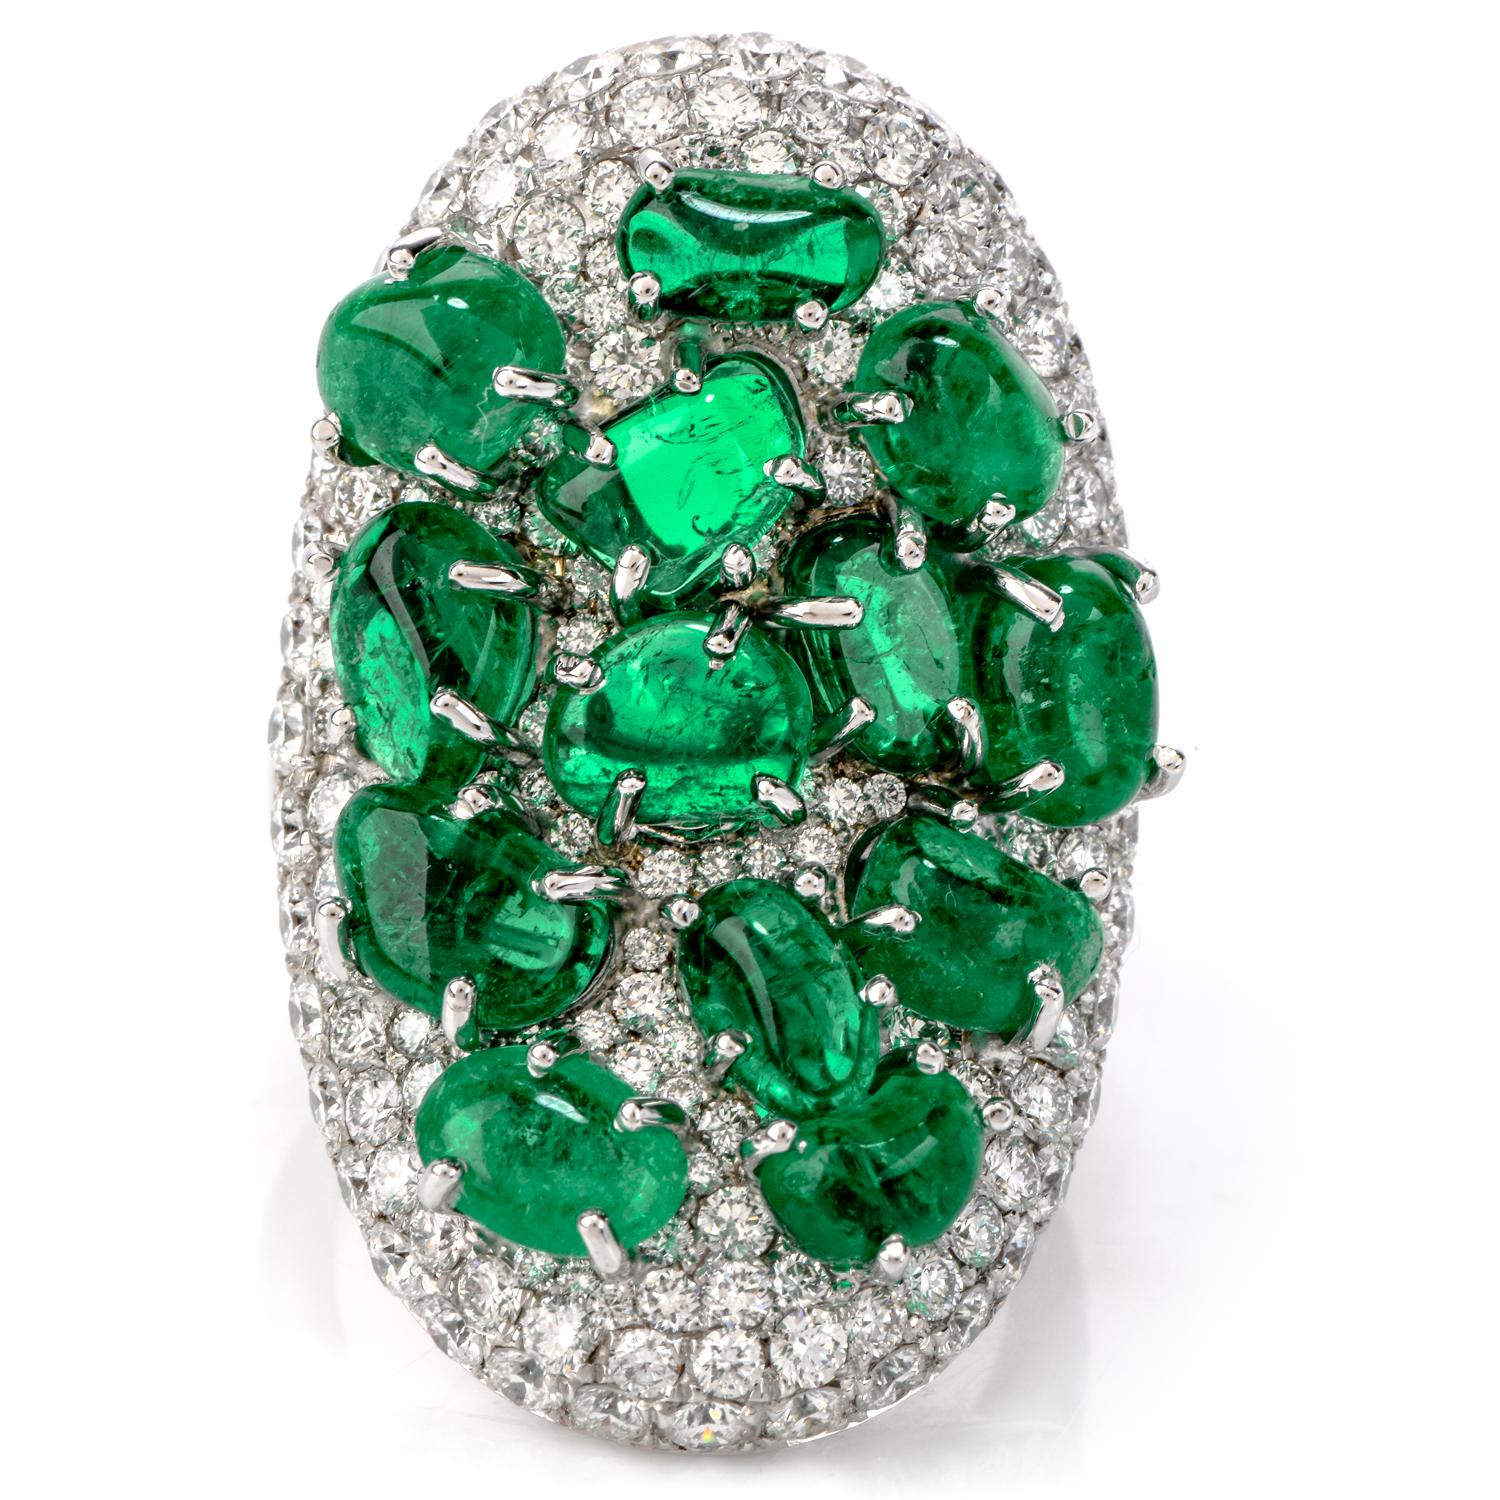 Be exciting and bold with this vivid Estate Diamond Colombian Emerald Platinum Cabochon Cluster Ring!  This bright large cocktail ring showcases approximately 13 genuine green Colombian Emeralds of 10.01 carats with minor inclusions.  They are a